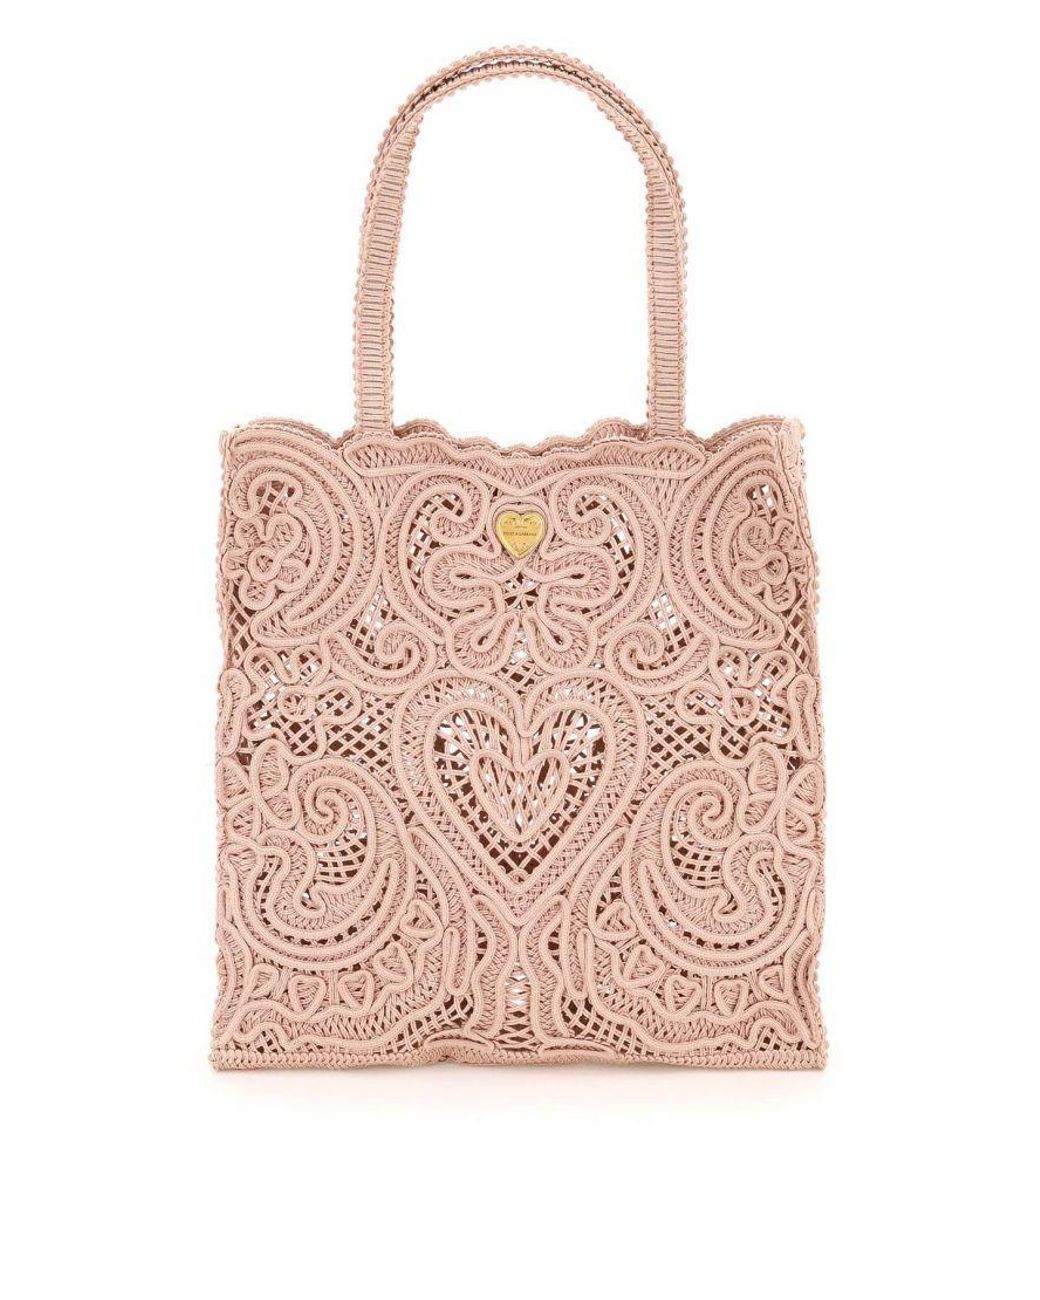 Dolce & Gabbana Beatrice Medium Tote Bag Cordonetto Lace in Pink | Lyst